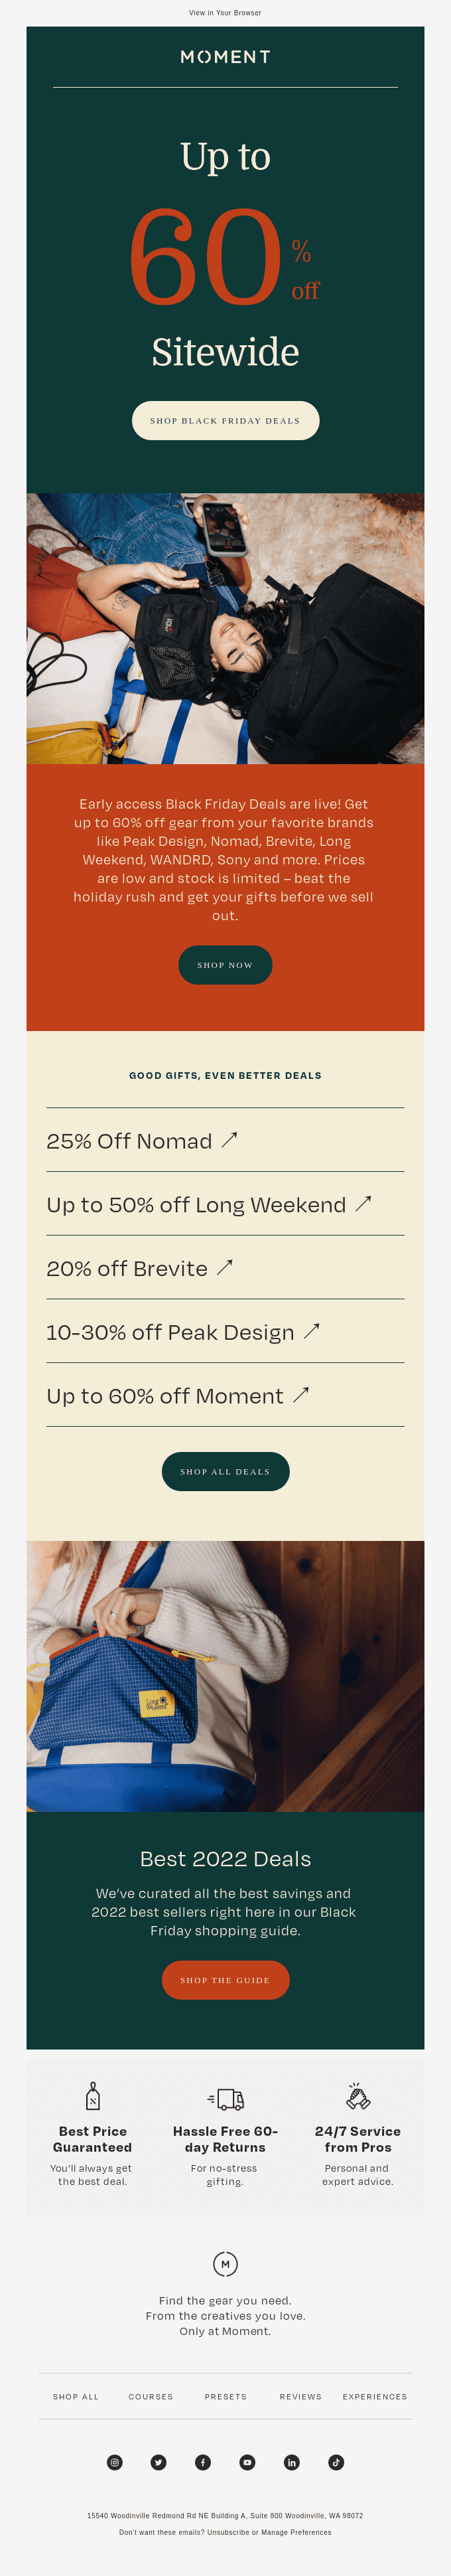 Moment's Black Friday marketing email